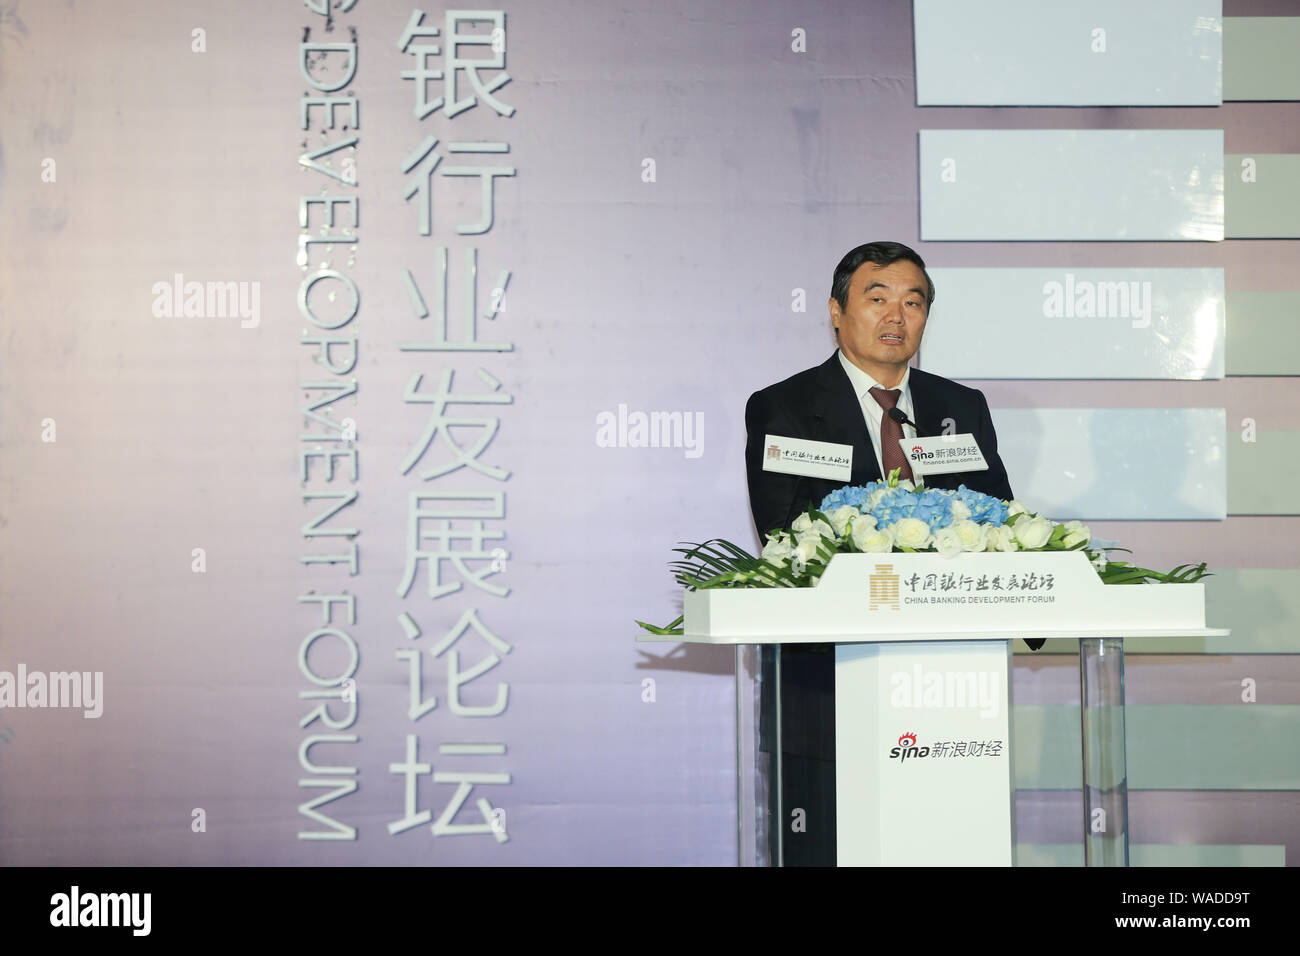 --FILE--Hu Huaibang, then Chairman of China Development Bank (CDB), delivers a speech during the 2017 China Banking Development Forum in Beijing, Chin Stock Photo